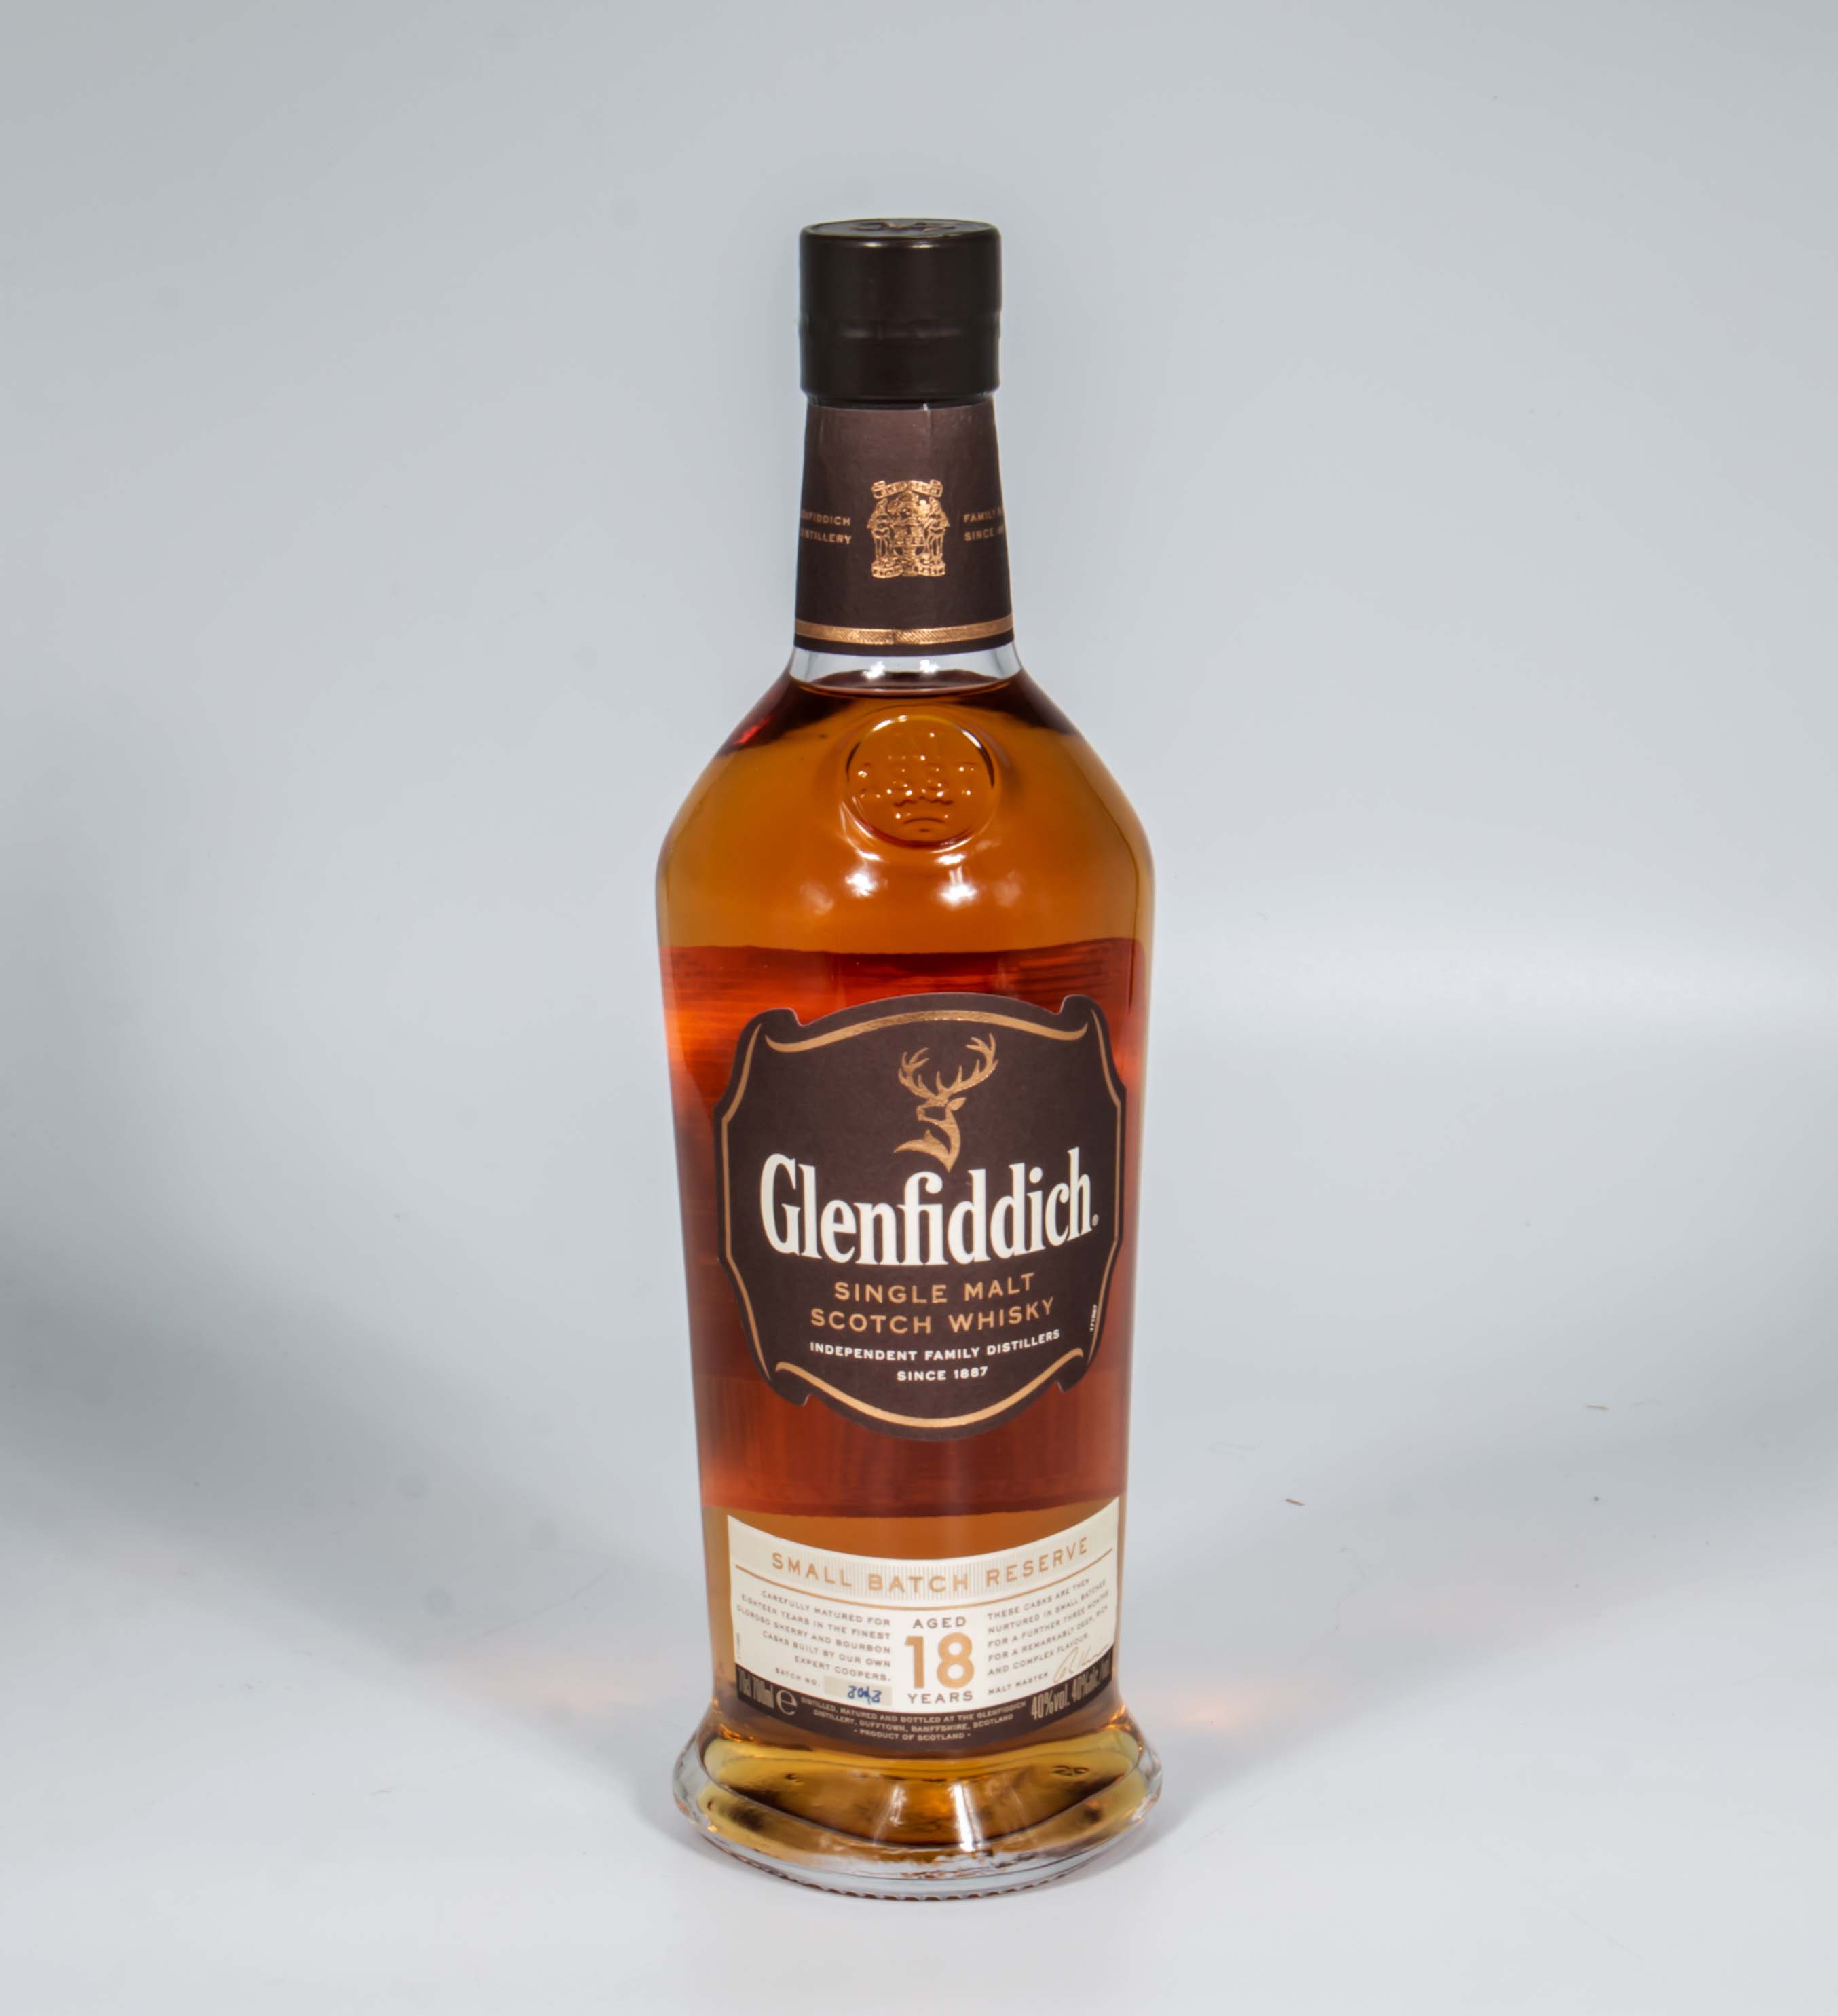 A bottle of Glenfiddich single malt whisky aged 18 years small batch reserve